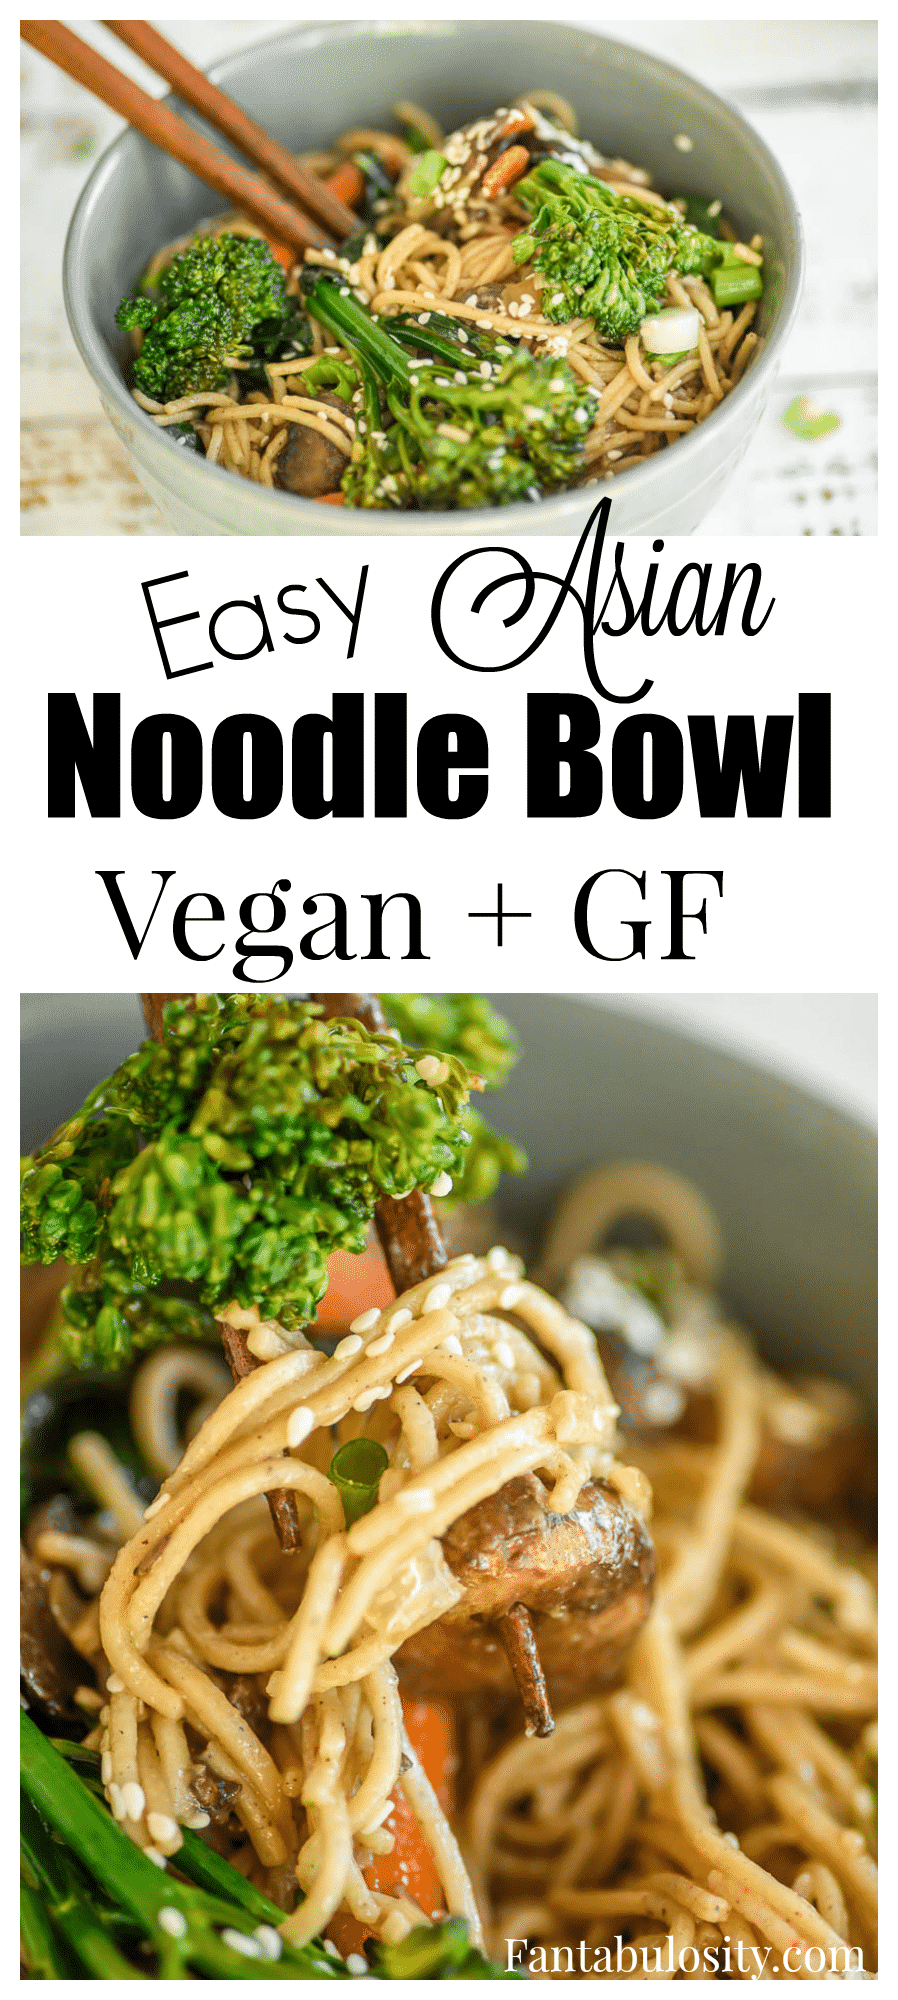 Easy asian noodle recipe - vegan and gluten free